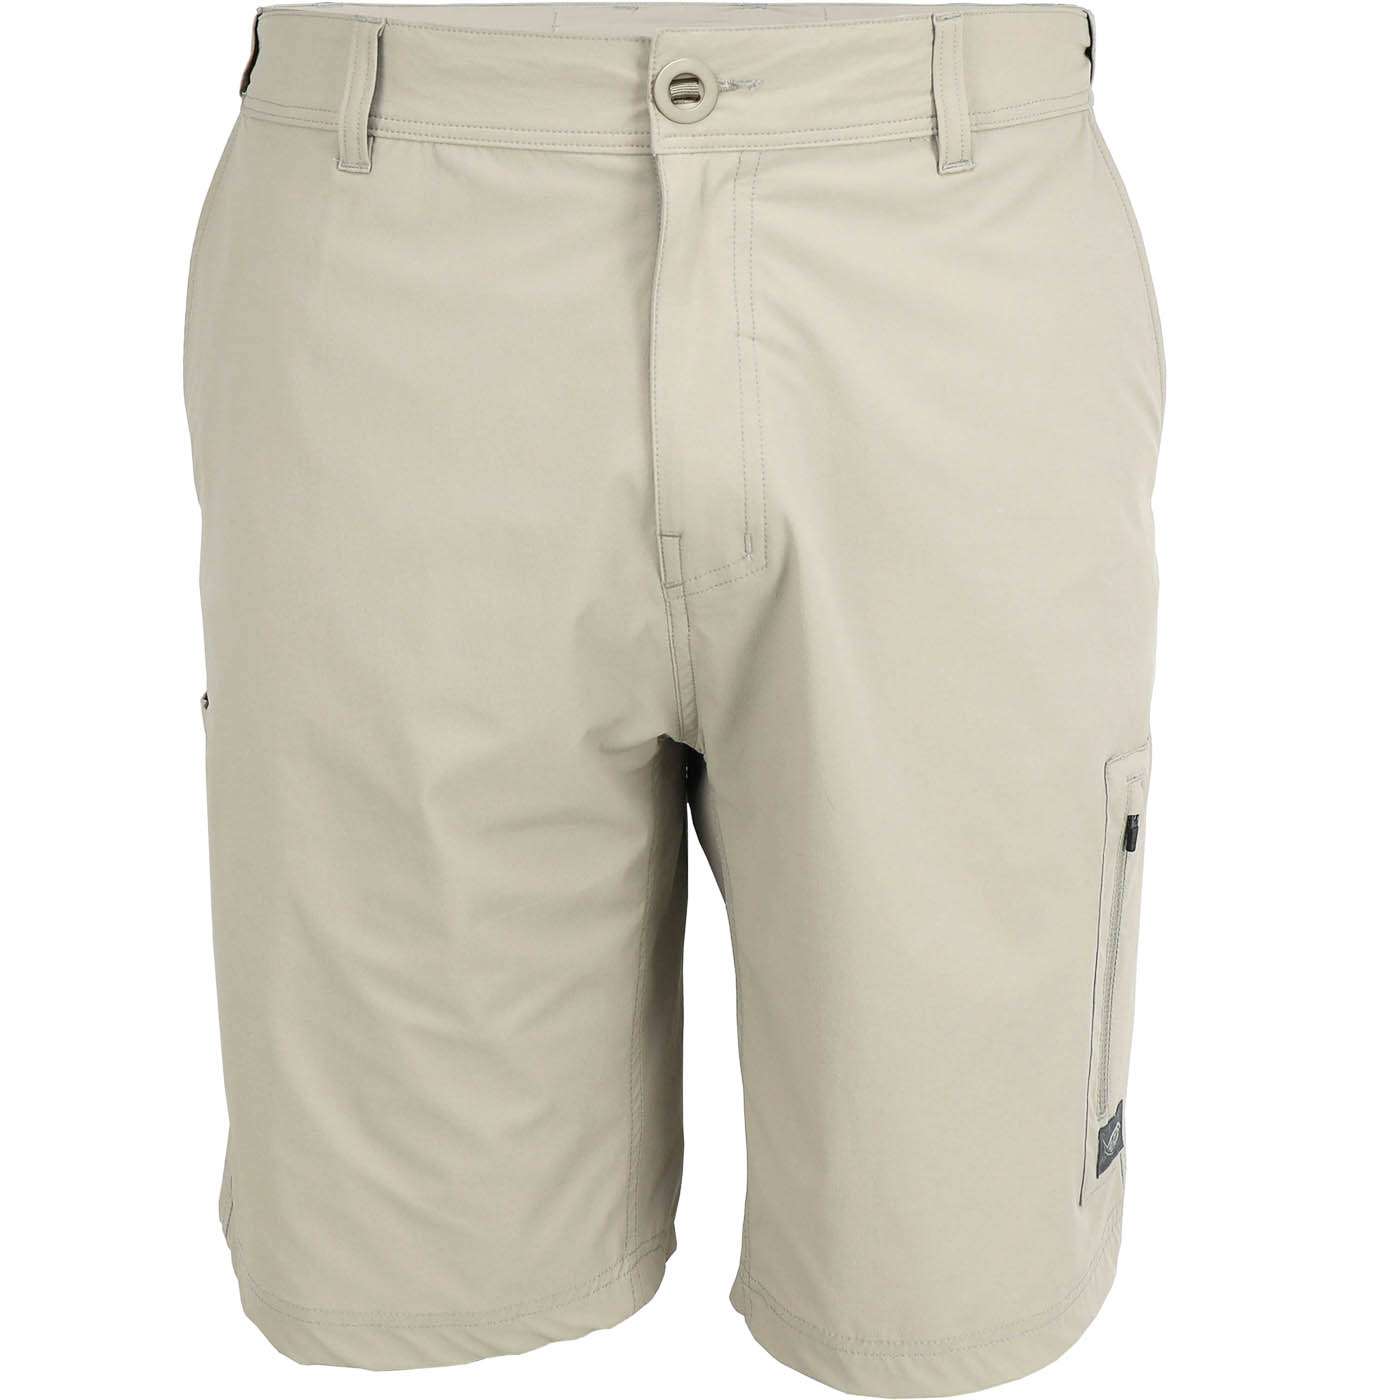 <p><strong>AFTCO Rescue Regenerated Fishing Shorts</strong></p><p>Part of Rescue is part of an all-new capsule of technical performance fishing clothing made from ECONYL regenerated nylon. Itâs a unique fabric spun from ocean and landfill waste including decommissioned fishing nets, industrial plastics, and textile fabric scraps. Rescue shorts are constructed with a durable ripstop 86% ECONYL, 14% spandex 141gsm. Features include 4-way stretch, DWR stain resistance, unique slide elastic waistband, 300D plier utility pocket + Block Tapey closure, crotch gusset, 10